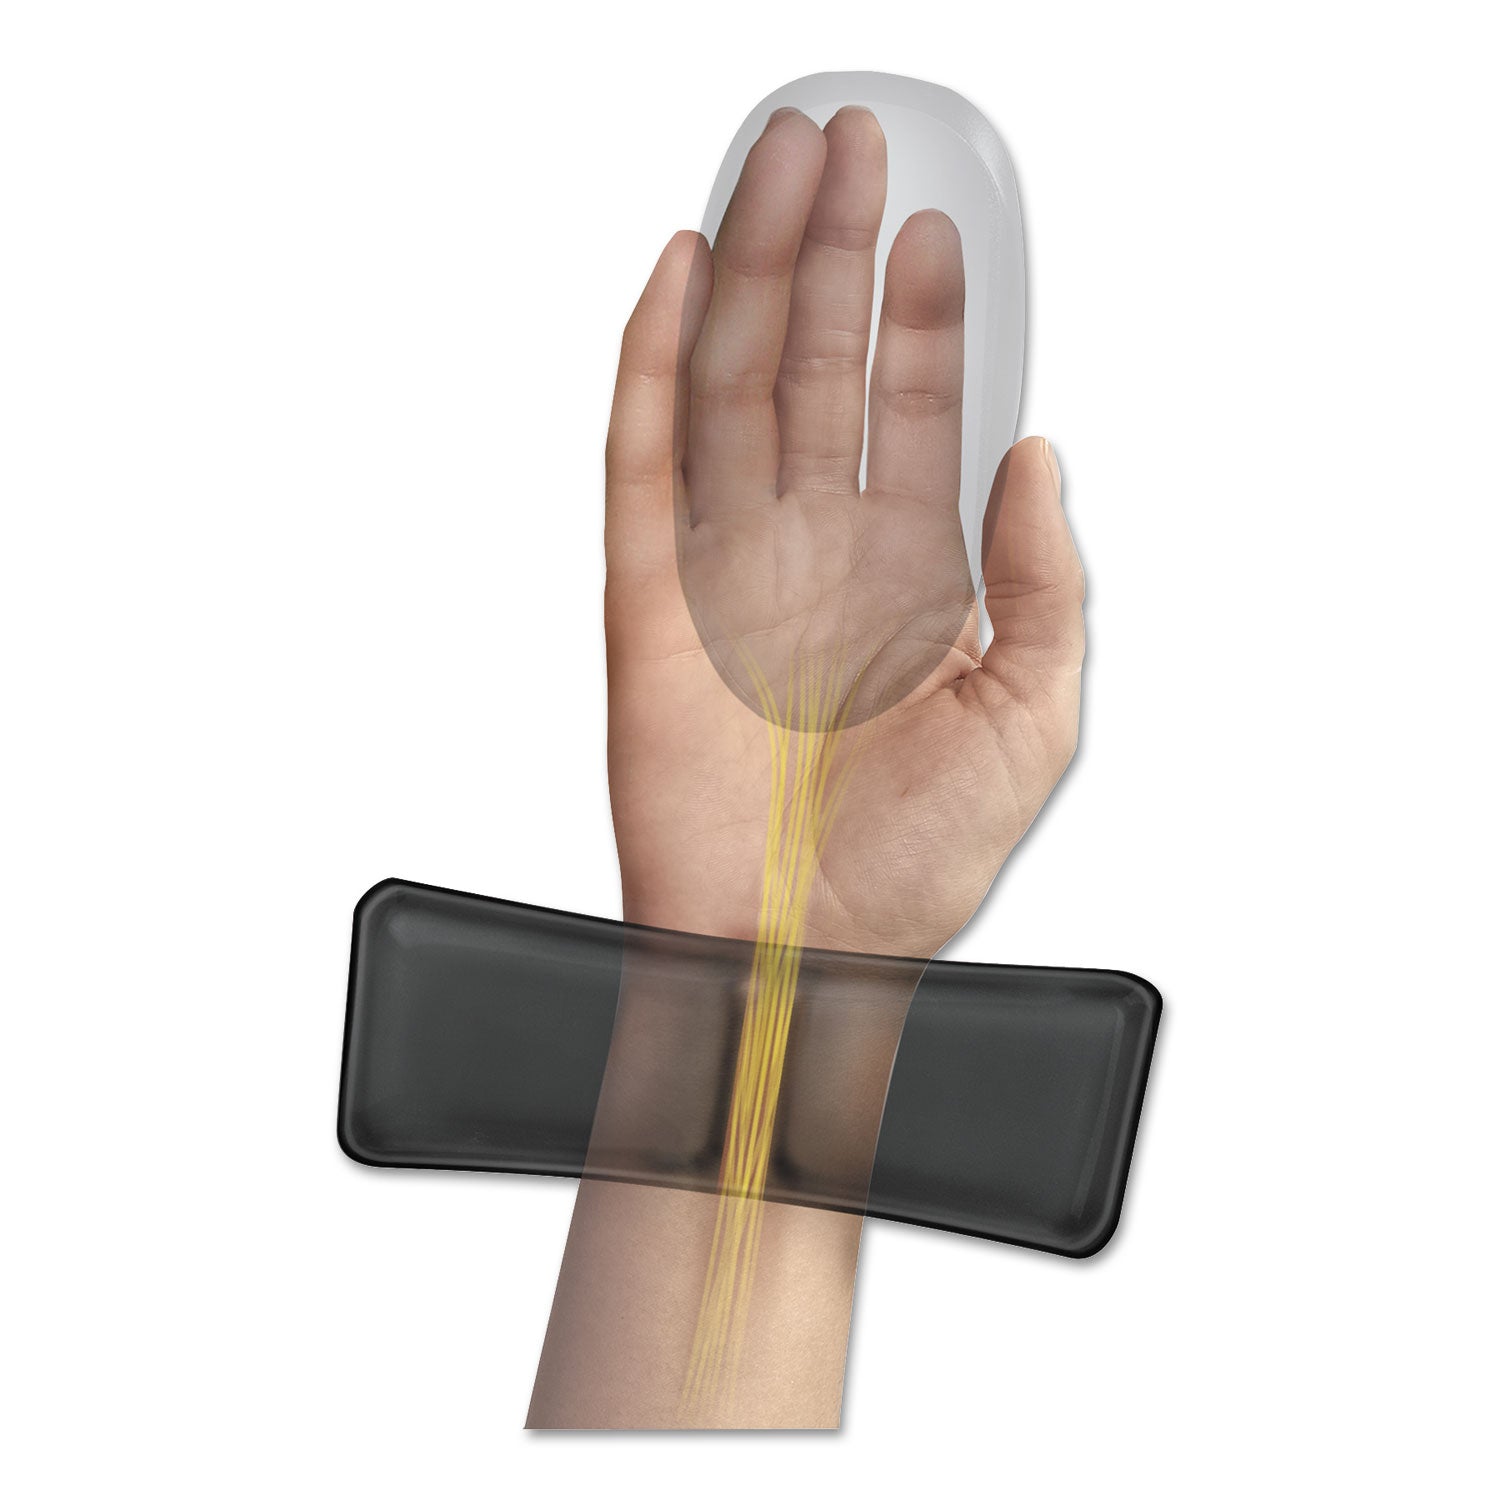 Gel Wrist Support with Attached Mouse Pad, 8.25 x 9.87, Black - 